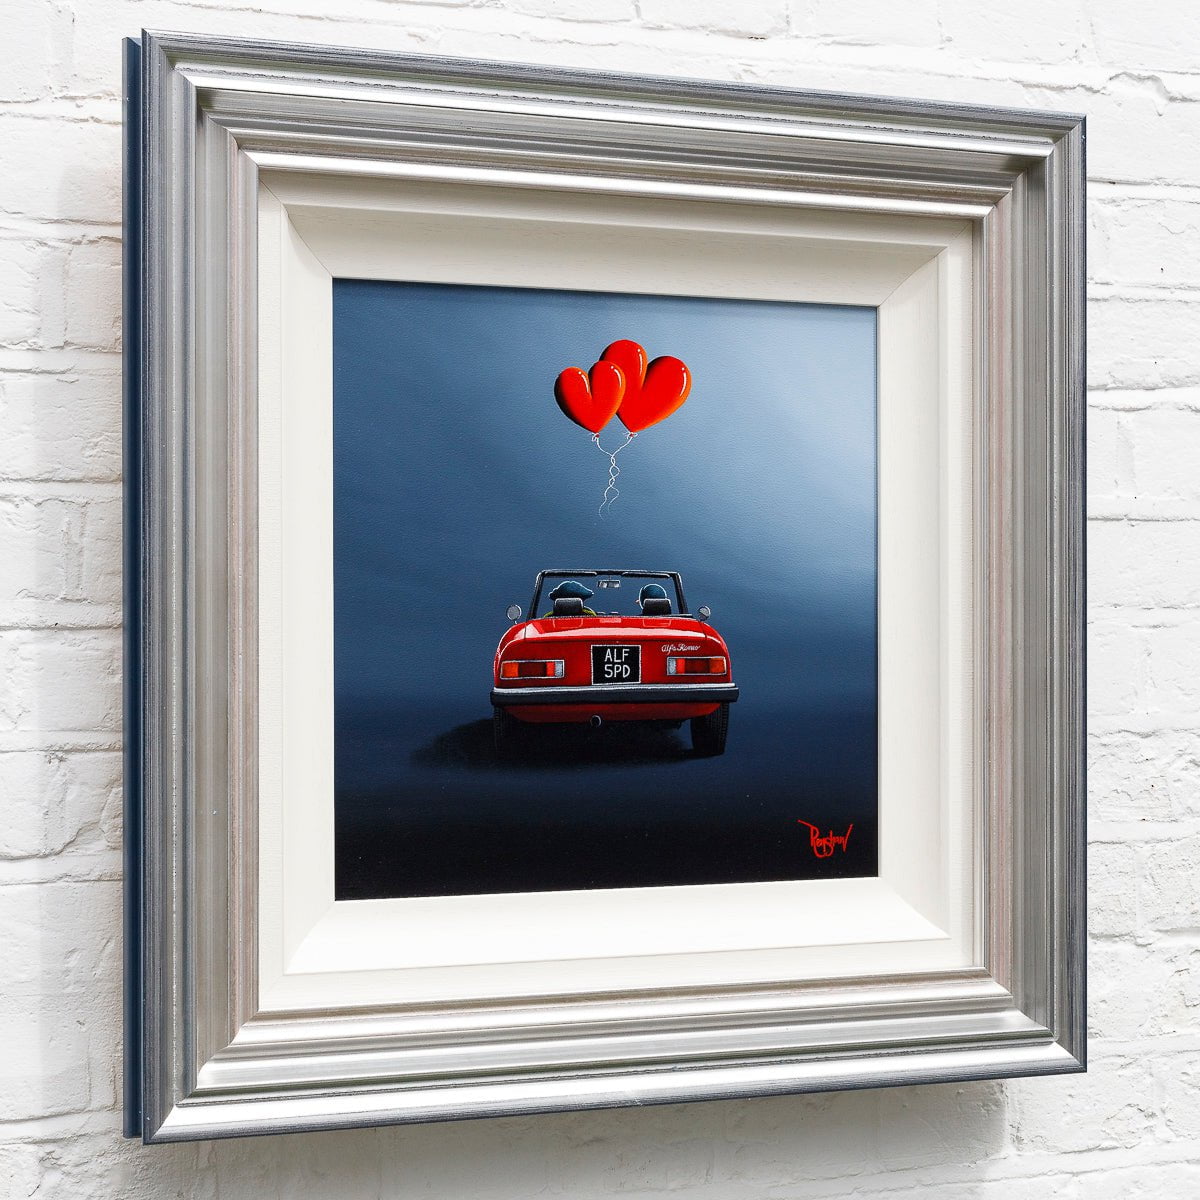 On The Road With You - Original David Renshaw Framed